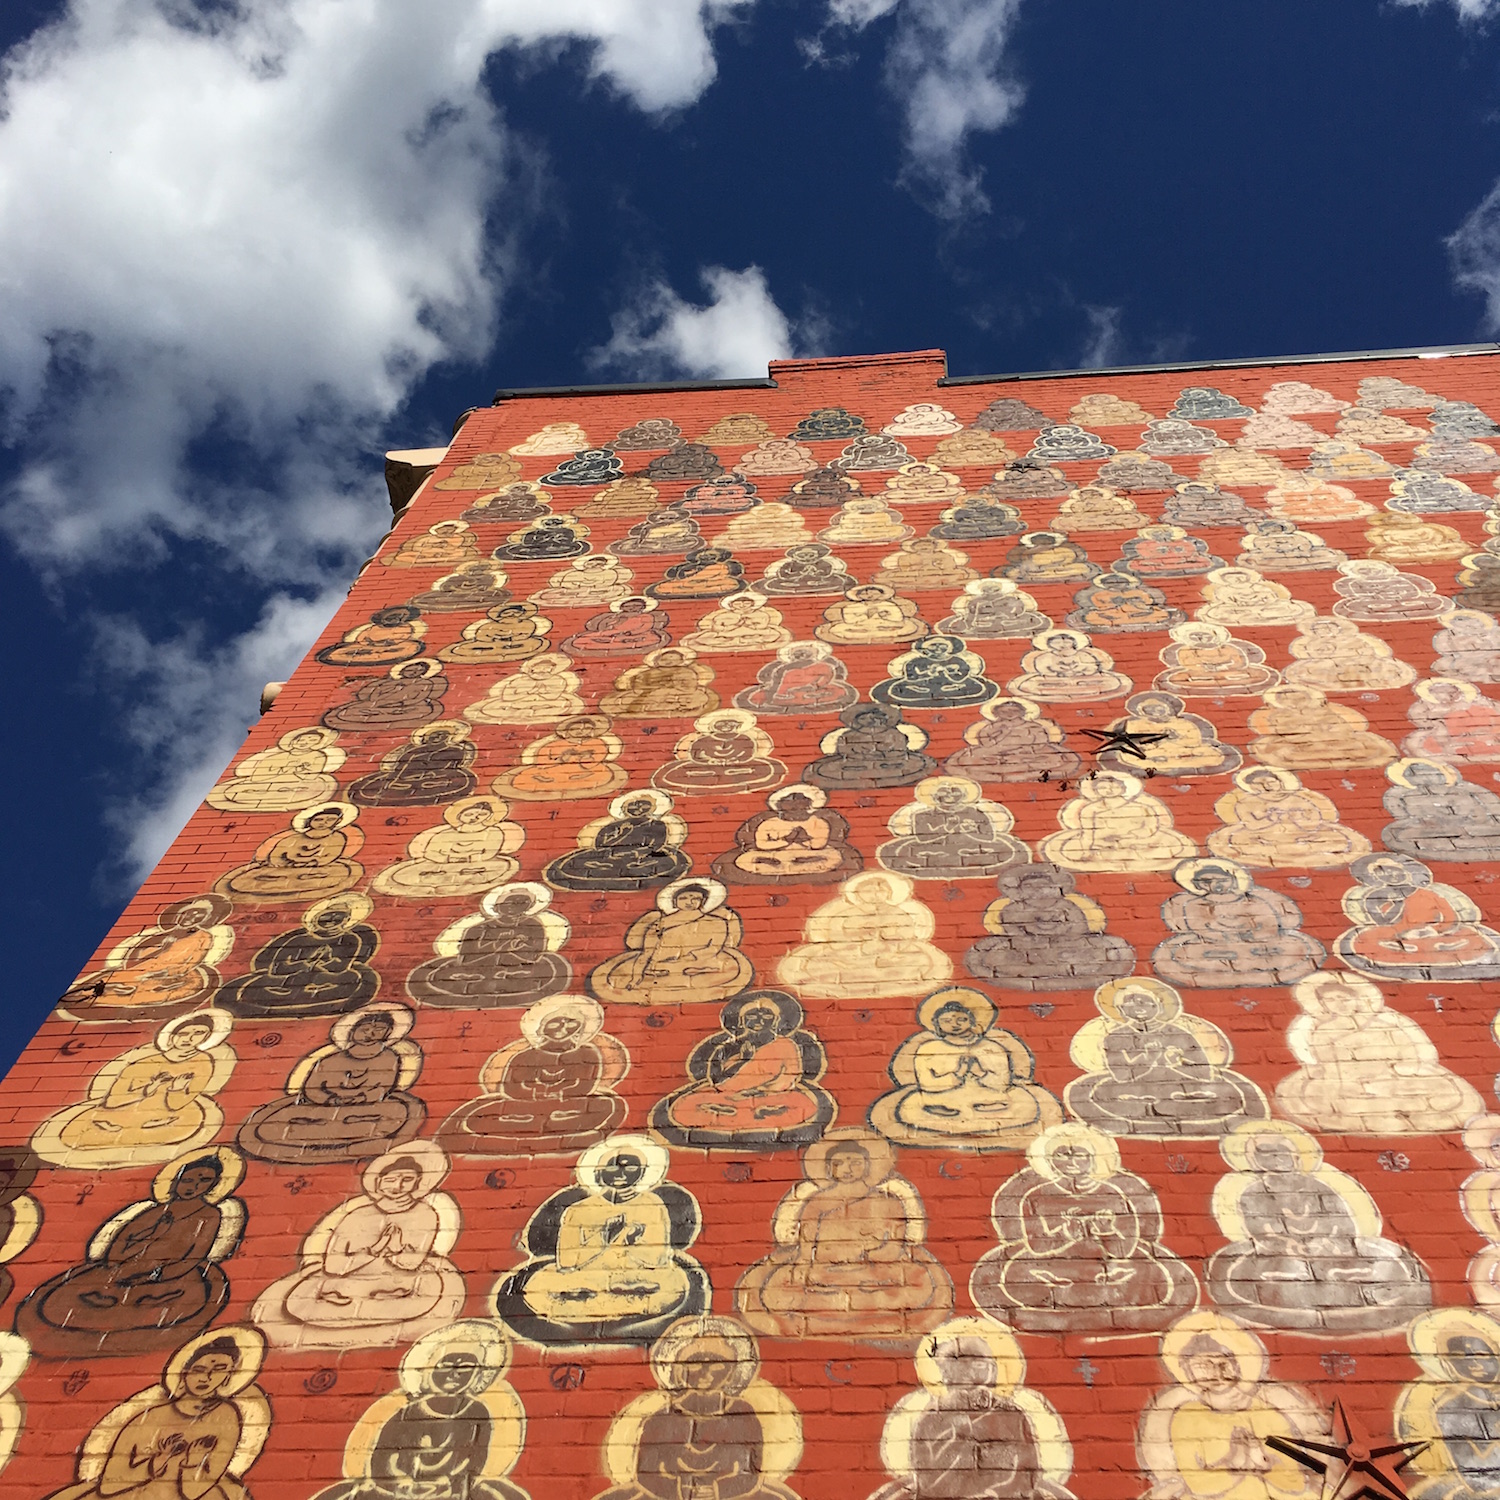 10,000 Buddhas Mural with the sky in the background